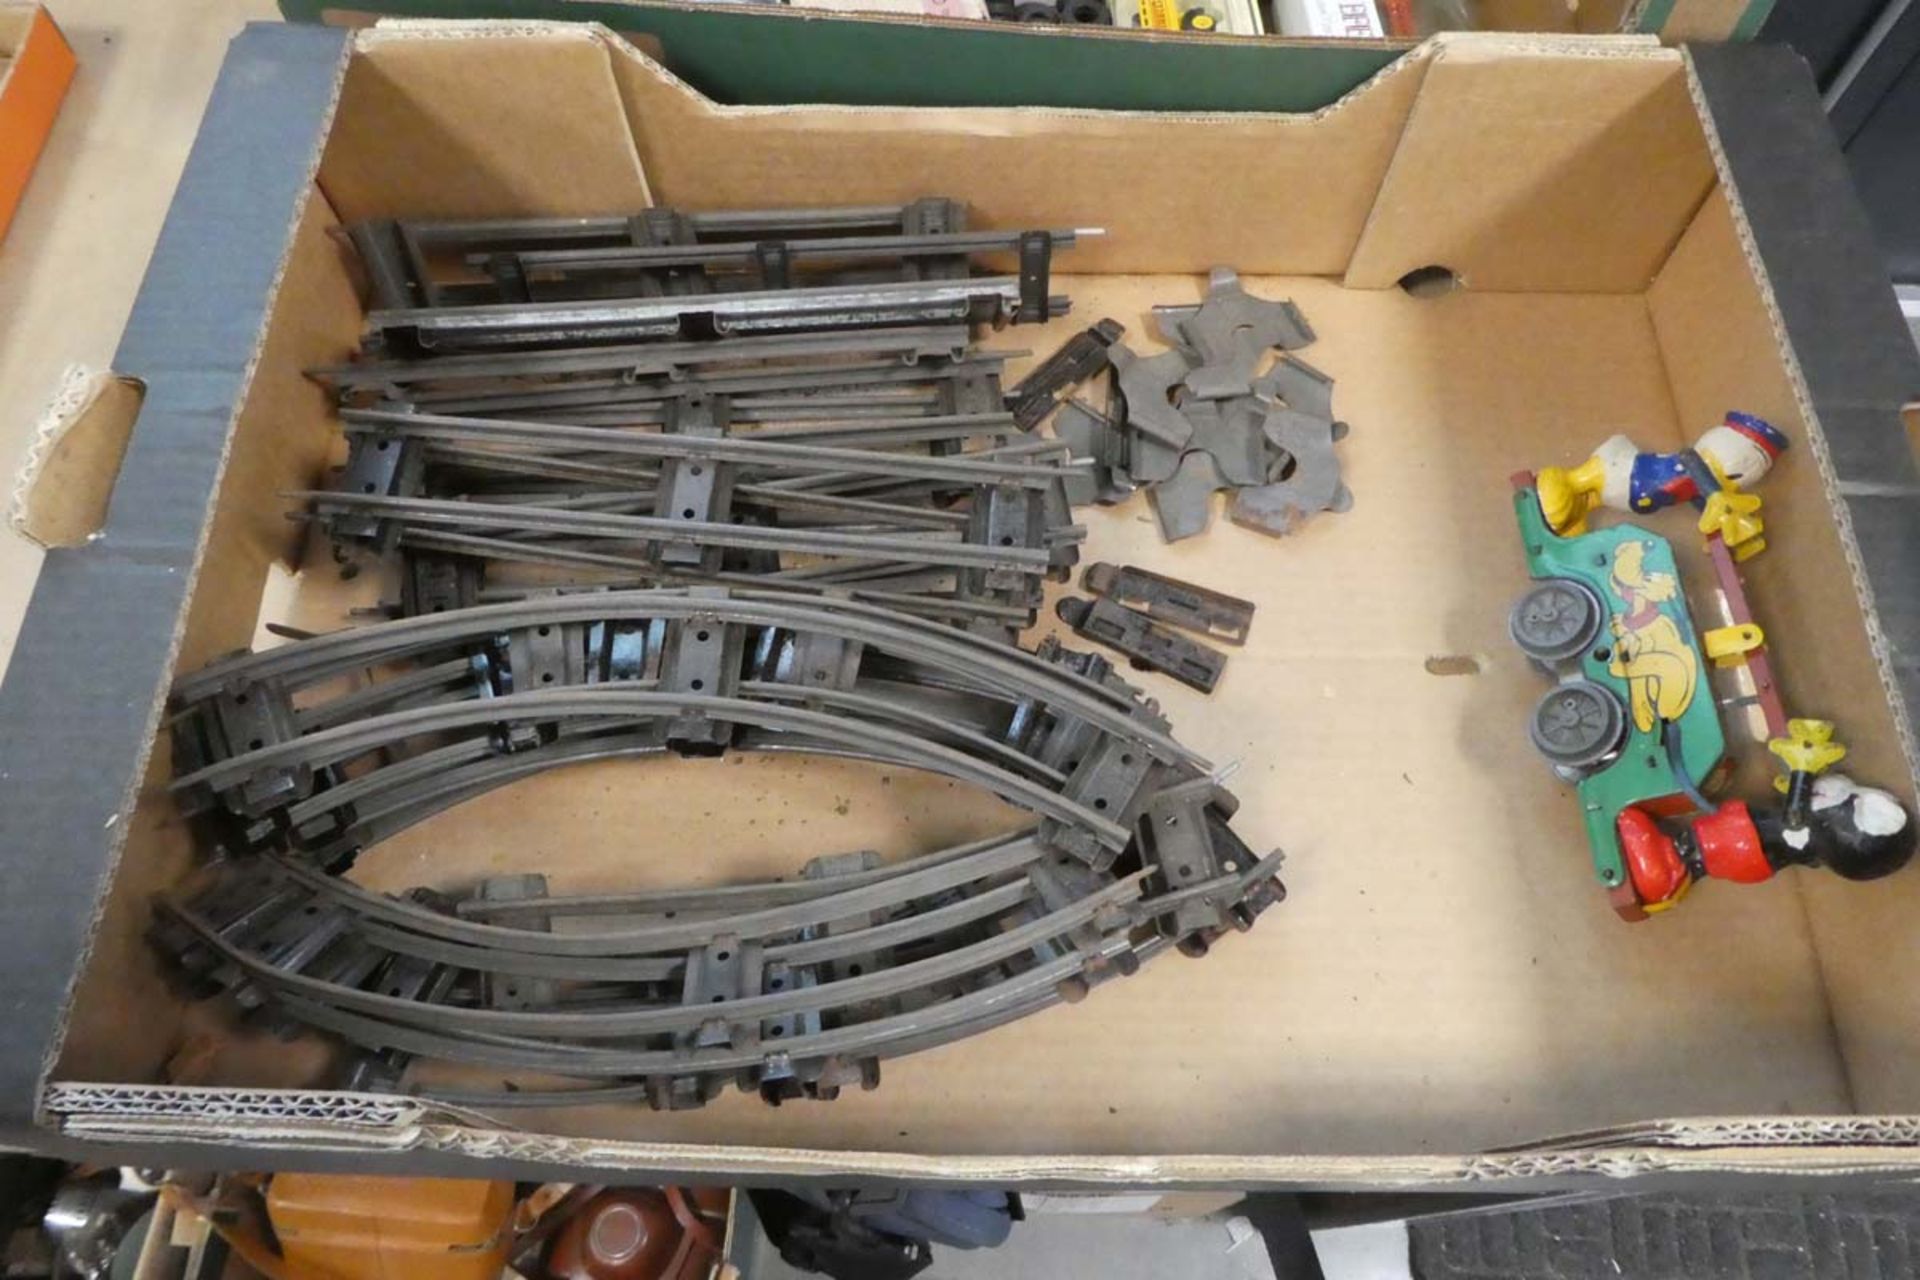 Hornby train set together with tinplate carriages, rails and Disney tinplate toy - Image 2 of 2